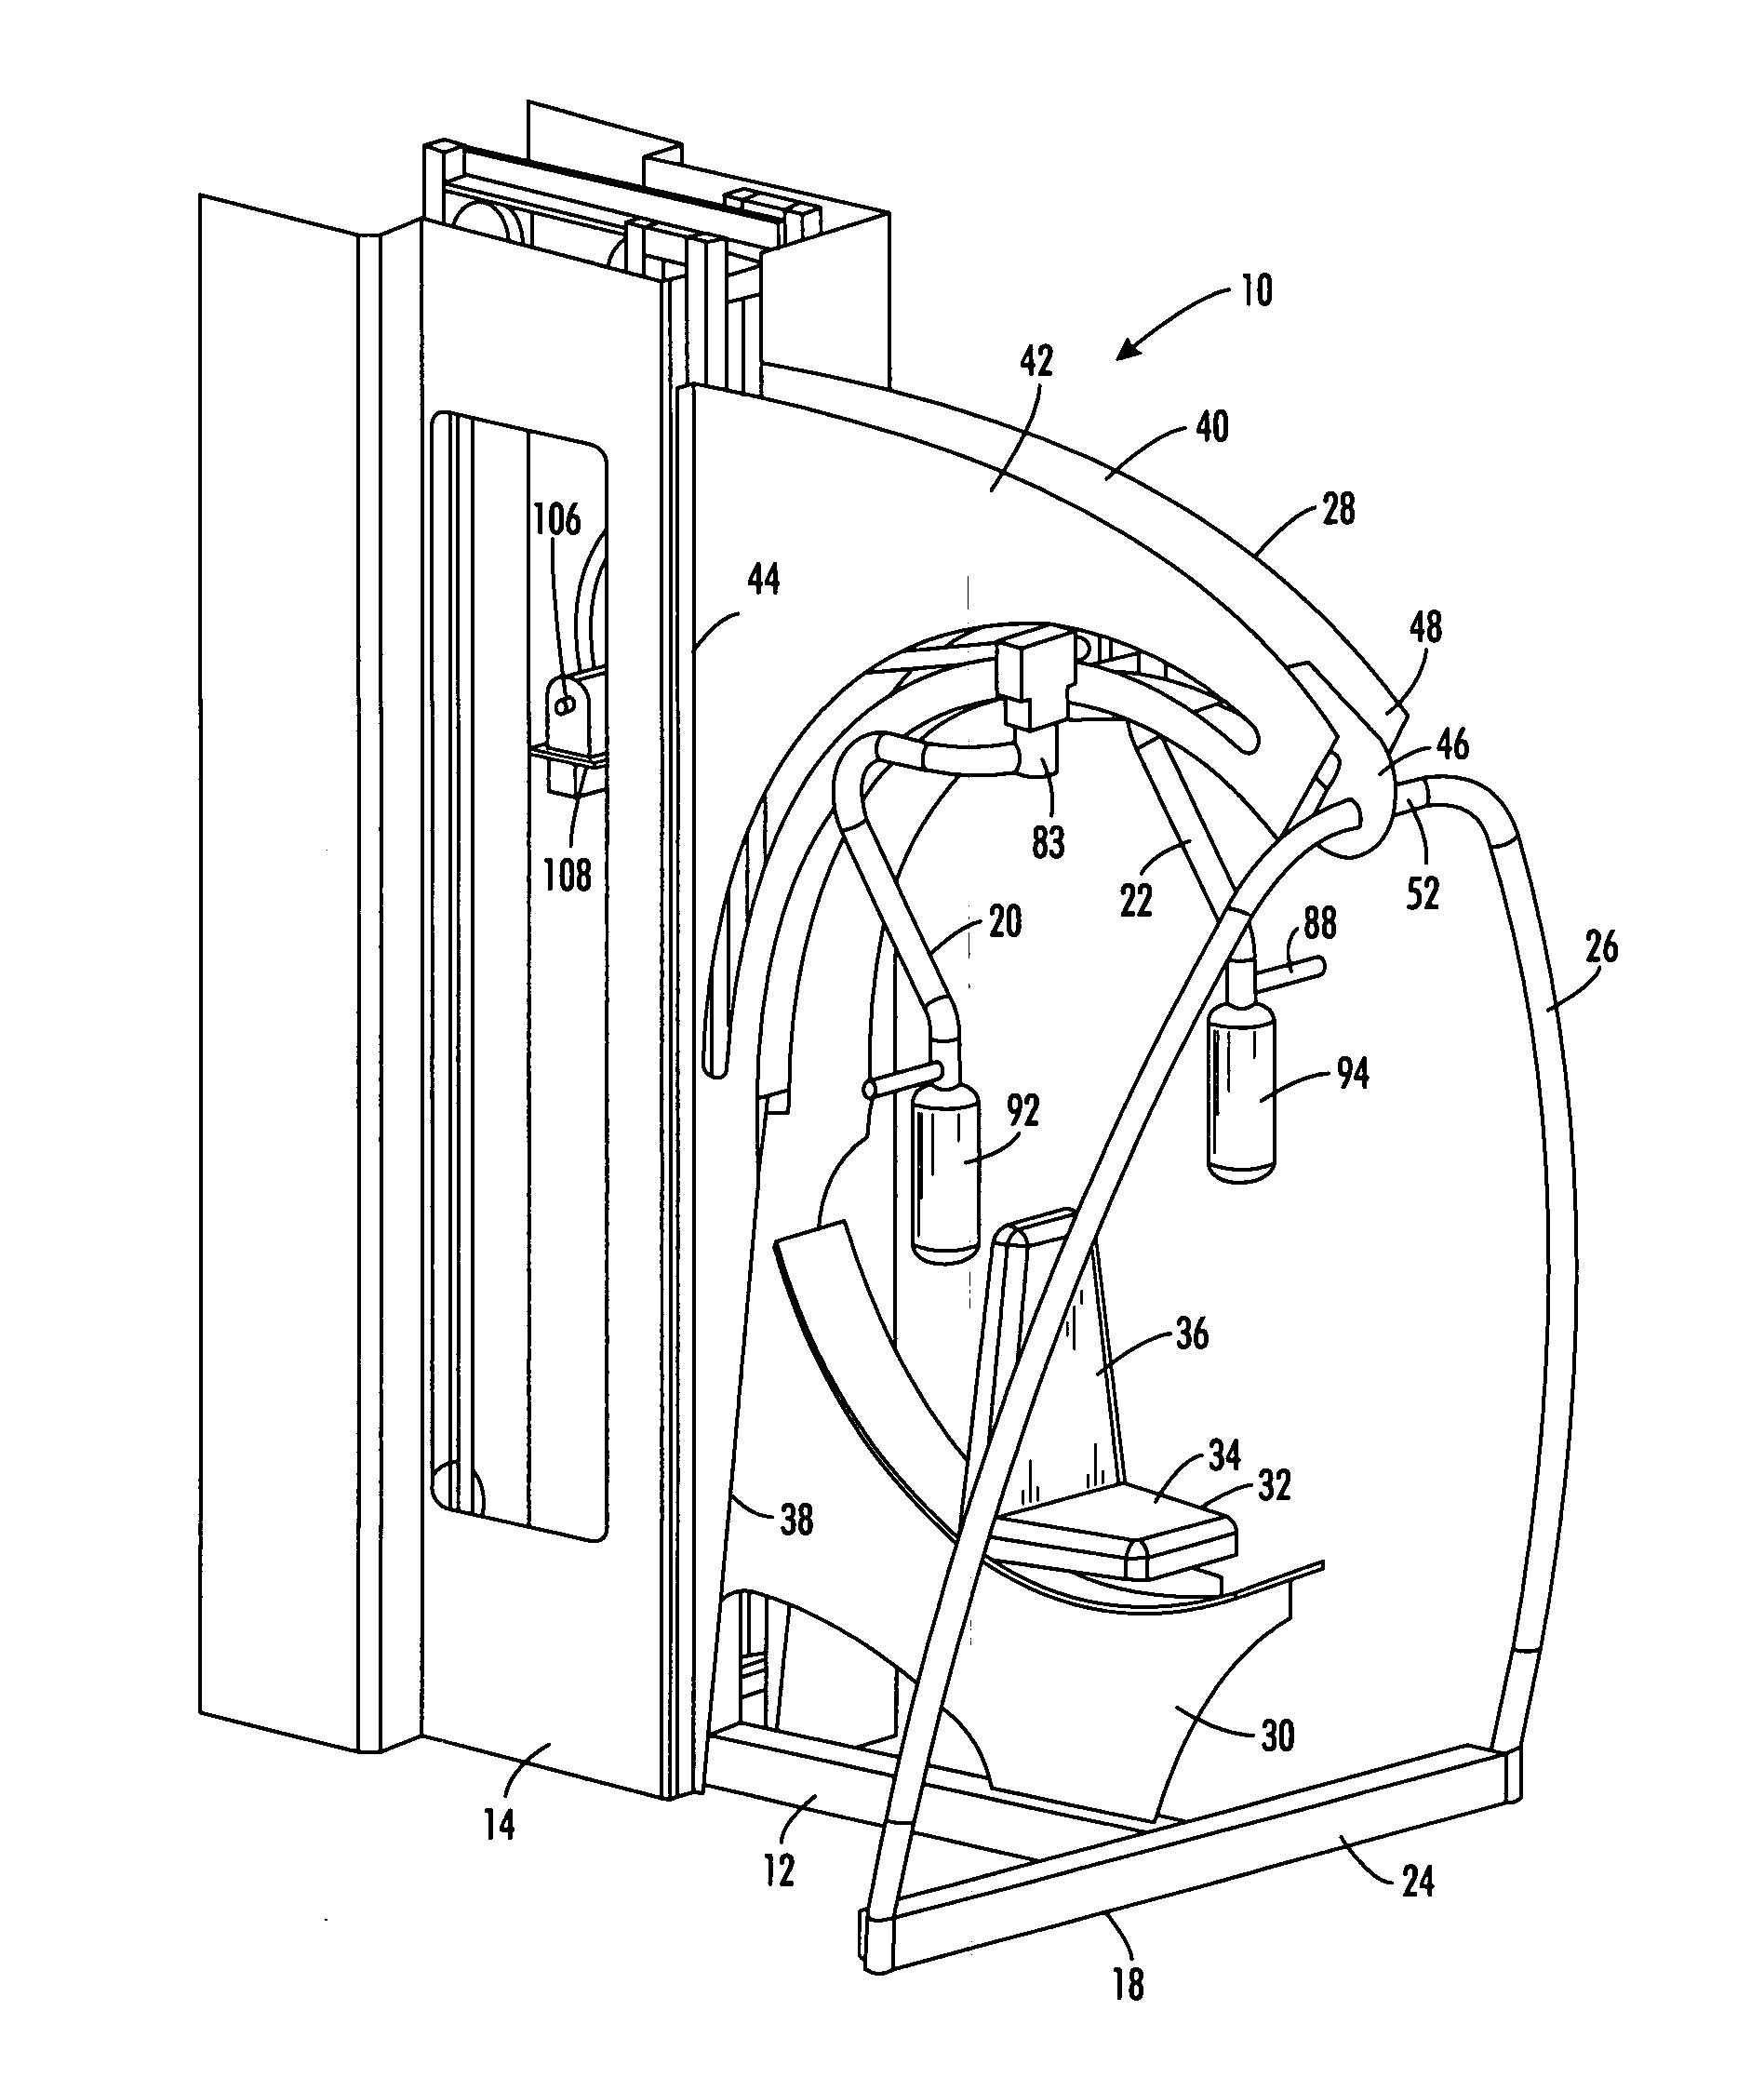 Multi-axis resistance exercise device